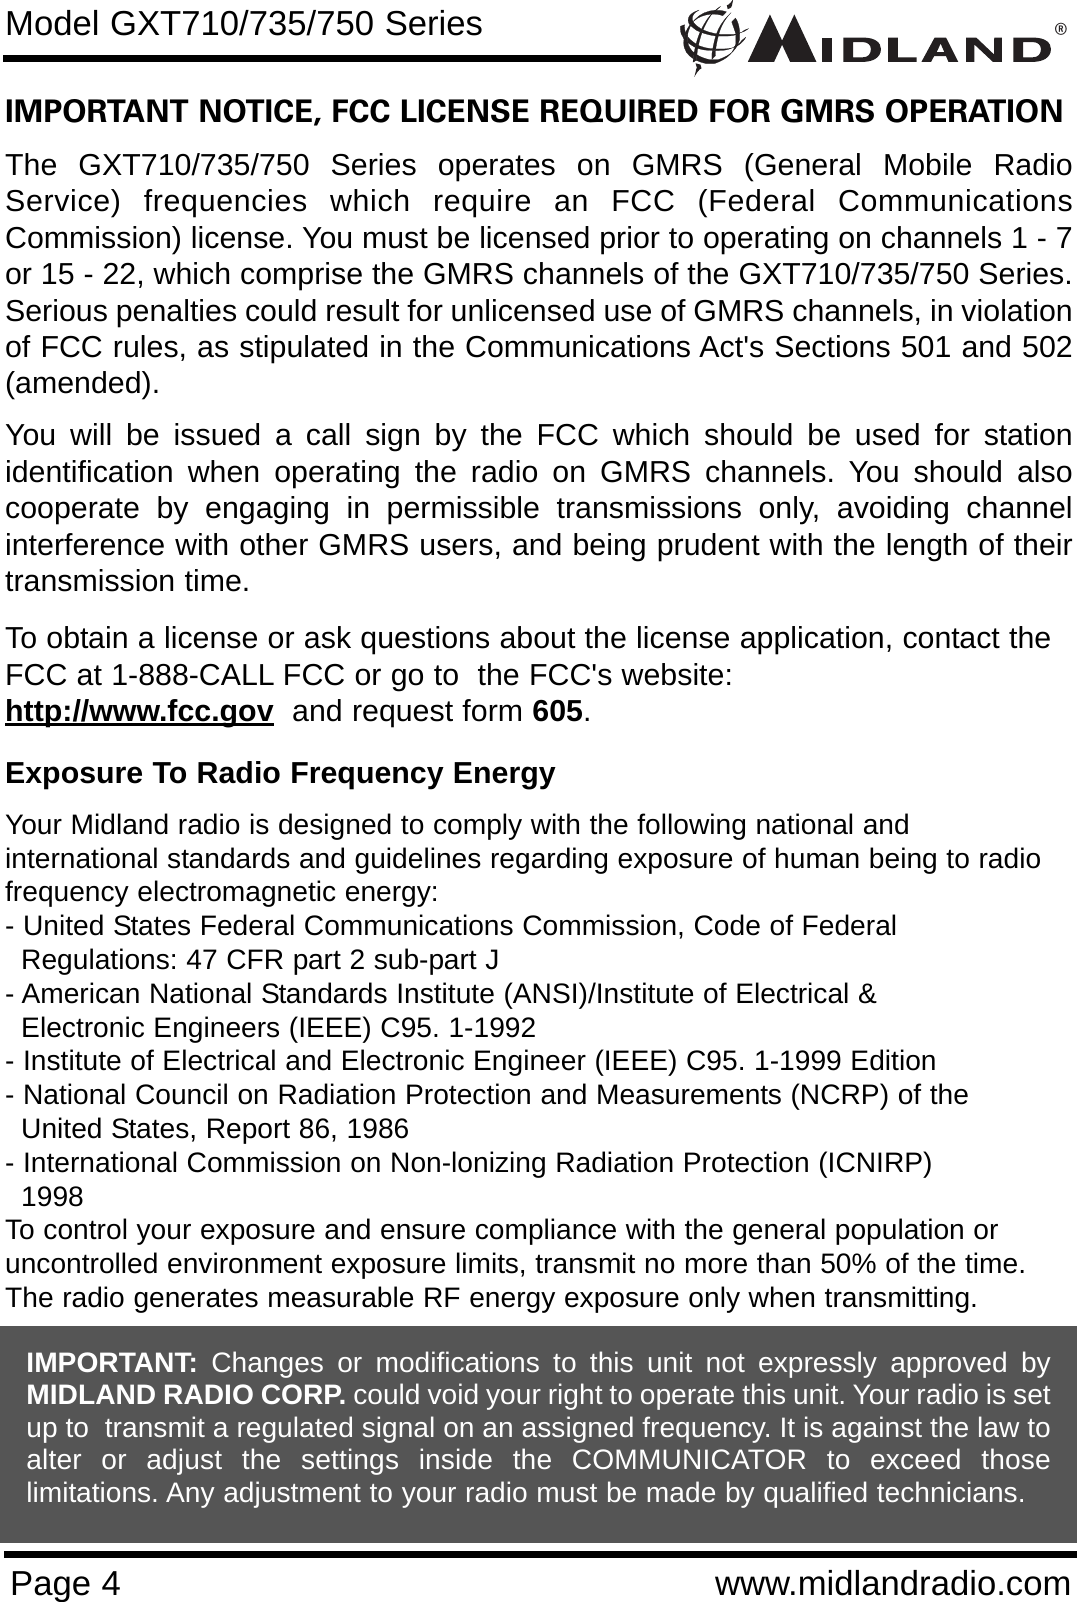 ®Page 4 www.midlandradio.comIMPORTANT NOTICE, FCC LICENSE REQUIRED FOR GMRS OPERATIONThe GXT710/735/750 Series operates on GMRS (General Mobile RadioService) frequencies which require an FCC (Federal CommunicationsCommission) license. You must be licensed prior to operating on channels 1 - 7or 15 - 22, which comprise the GMRS channels of the GXT710/735/750 Series.Serious penalties could result for unlicensed use of GMRS channels, in violationof FCC rules, as stipulated in the Communications Act&apos;s Sections 501 and 502(amended).You will be issued a call sign by the FCC which should be used for stationidentification when operating the radio on GMRS channels. You should alsocooperate by engaging in permissible transmissions only, avoiding channelinterference with other GMRS users, and being prudent with the length of theirtransmission time.To obtain a license or ask questions about the license application, contact theFCC at 1-888-CALL FCC or go to  the FCC&apos;s website:  http://www.fcc.gov and request form 605.Exposure To Radio Frequency EnergyYour Midland radio is designed to comply with the following national and international standards and guidelines regarding exposure of human being to radiofrequency electromagnetic energy:- United States Federal Communications Commission, Code of Federal Regulations: 47 CFR part 2 sub-part J- American National Standards Institute (ANSI)/Institute of Electrical &amp; Electronic Engineers (IEEE) C95. 1-1992- Institute of Electrical and Electronic Engineer (IEEE) C95. 1-1999 Edition- National Council on Radiation Protection and Measurements (NCRP) of the United States, Report 86, 1986- International Commission on Non-lonizing Radiation Protection (ICNIRP) 1998To control your exposure and ensure compliance with the general population oruncontrolled environment exposure limits, transmit no more than 50% of the time.The radio generates measurable RF energy exposure only when transmitting.Model GXT710/735/750 SeriesIMPORTANT: Changes or modifications to this unit not expressly approved byMIDLAND RADIO CORP. could void your right to operate this unit. Your radio is setup to  transmit a regulated signal on an assigned frequency. It is against the law toalter or adjust the settings inside the COMMUNICATOR to exceed thoselimitations. Any adjustment to your radio must be made by qualified technicians.